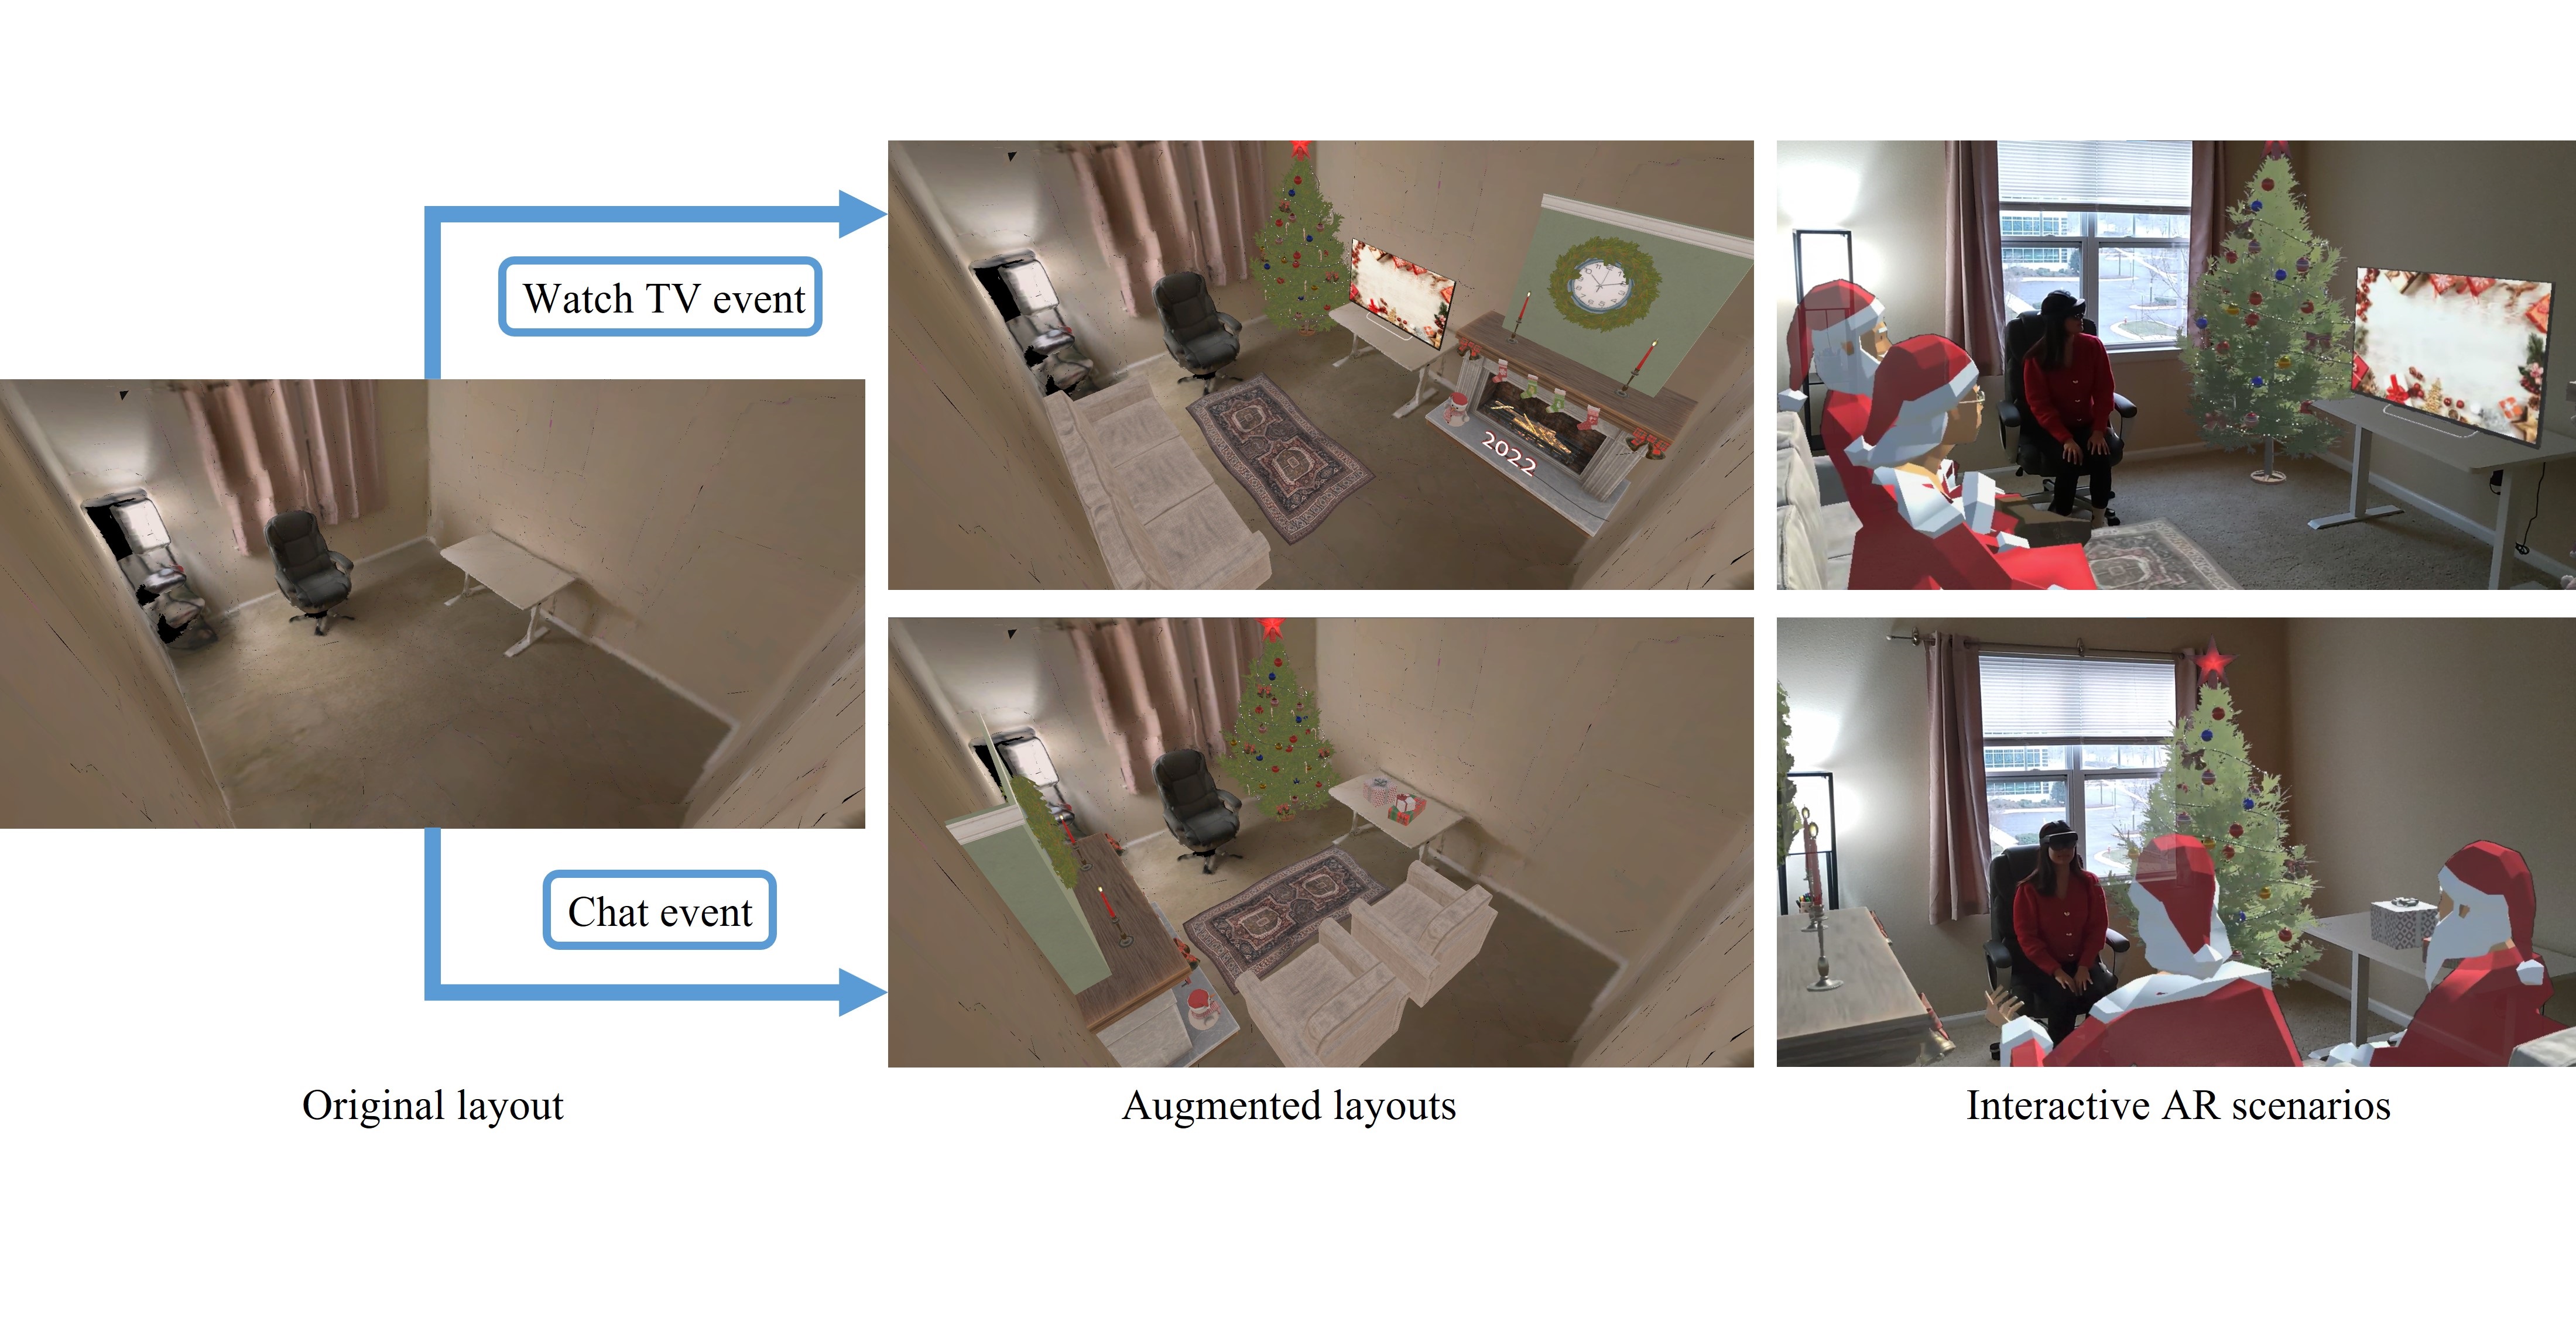 We extend our approach to automatically place virtual furniture and appliance objects for storytelling.